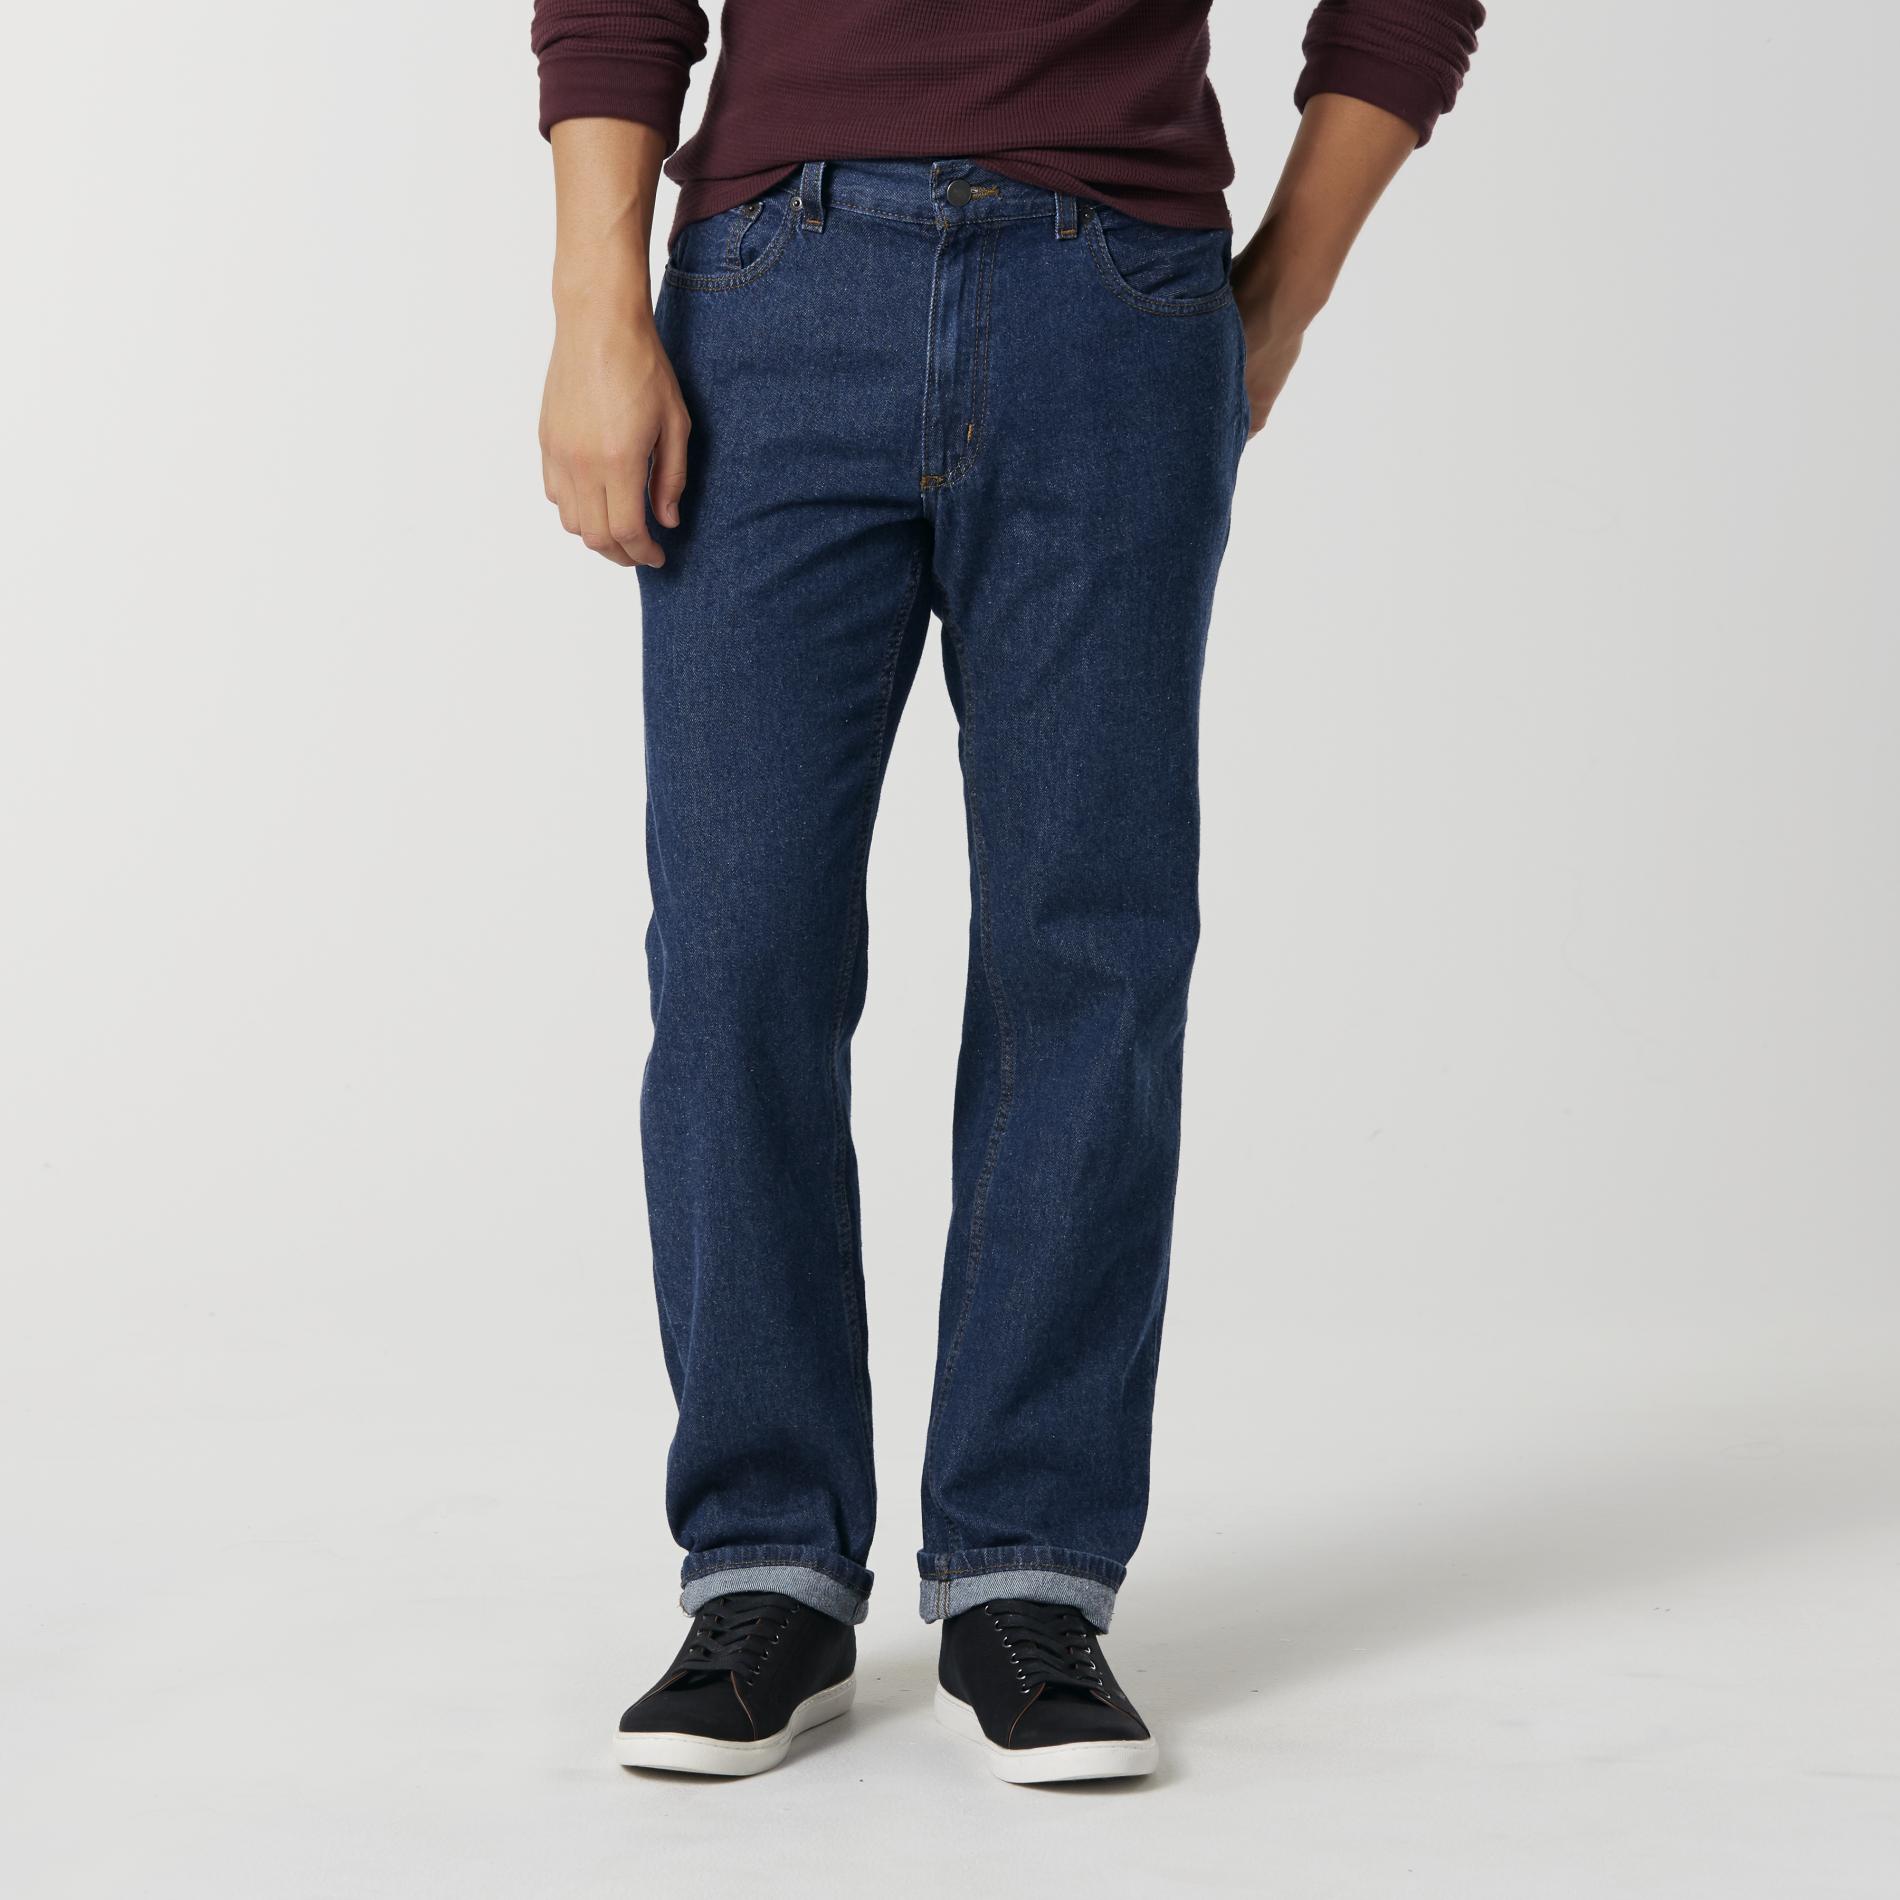 men's relaxed fit blue jeans